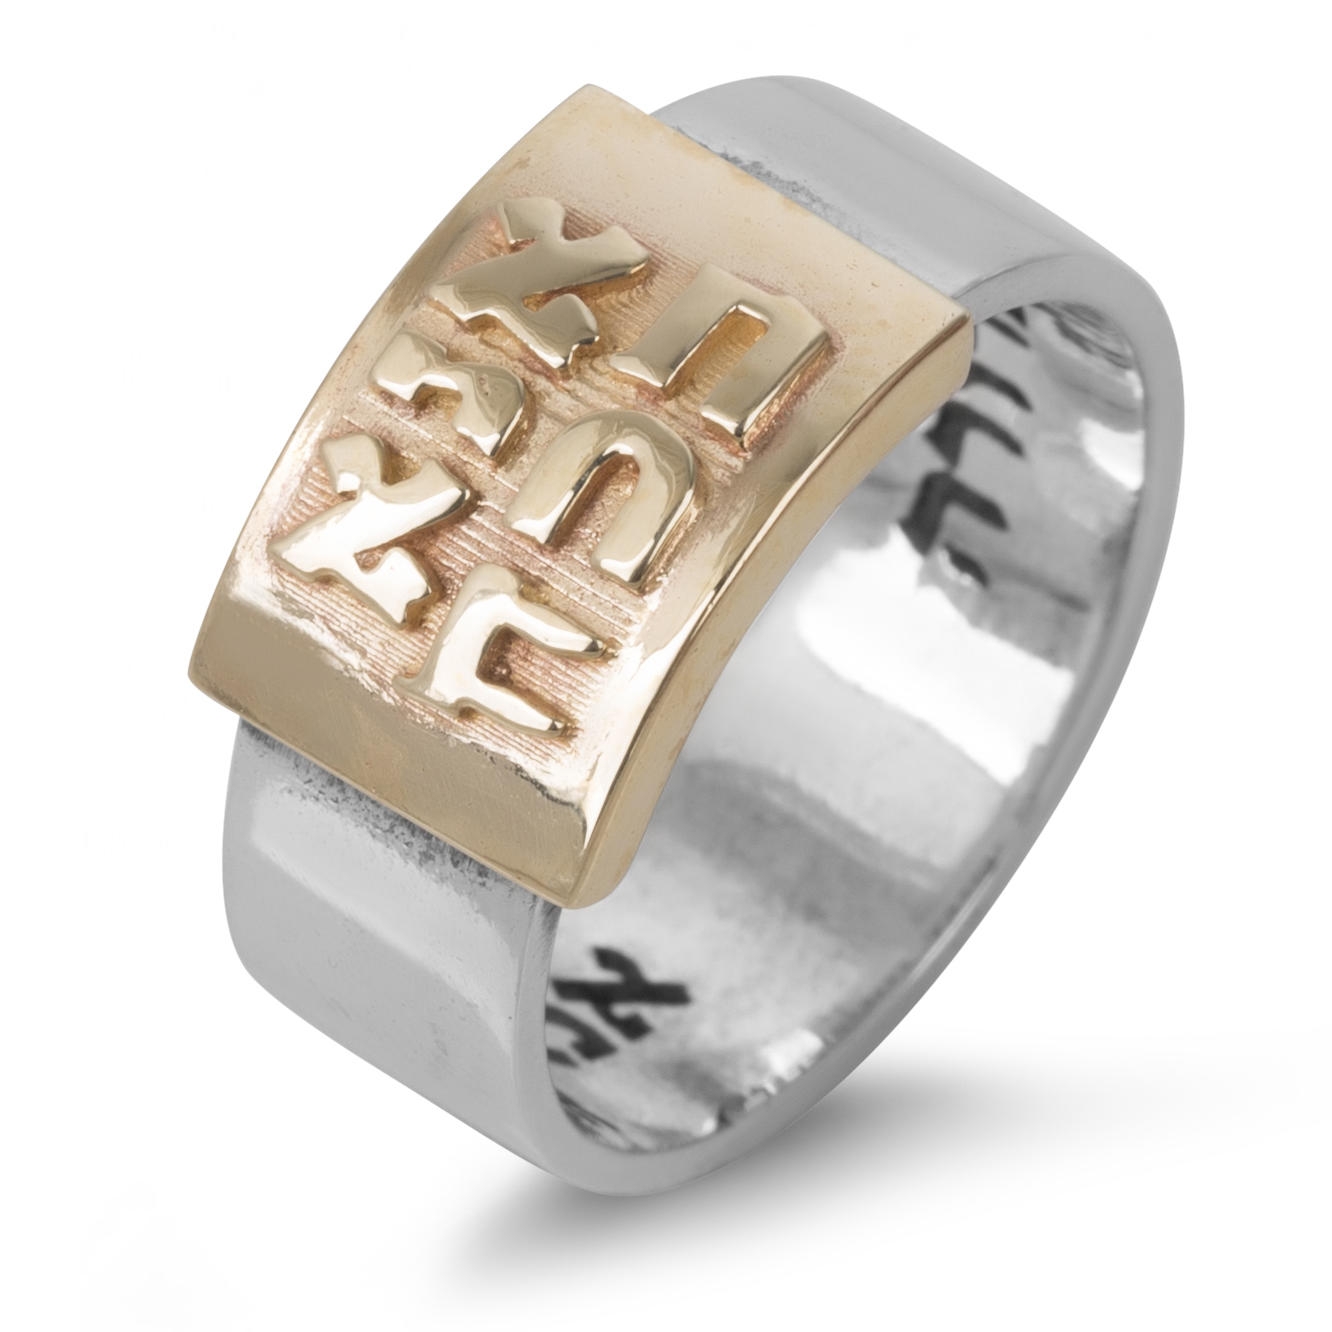 9K Gold and Sterling Silver Ana Bekoach Ring - 1